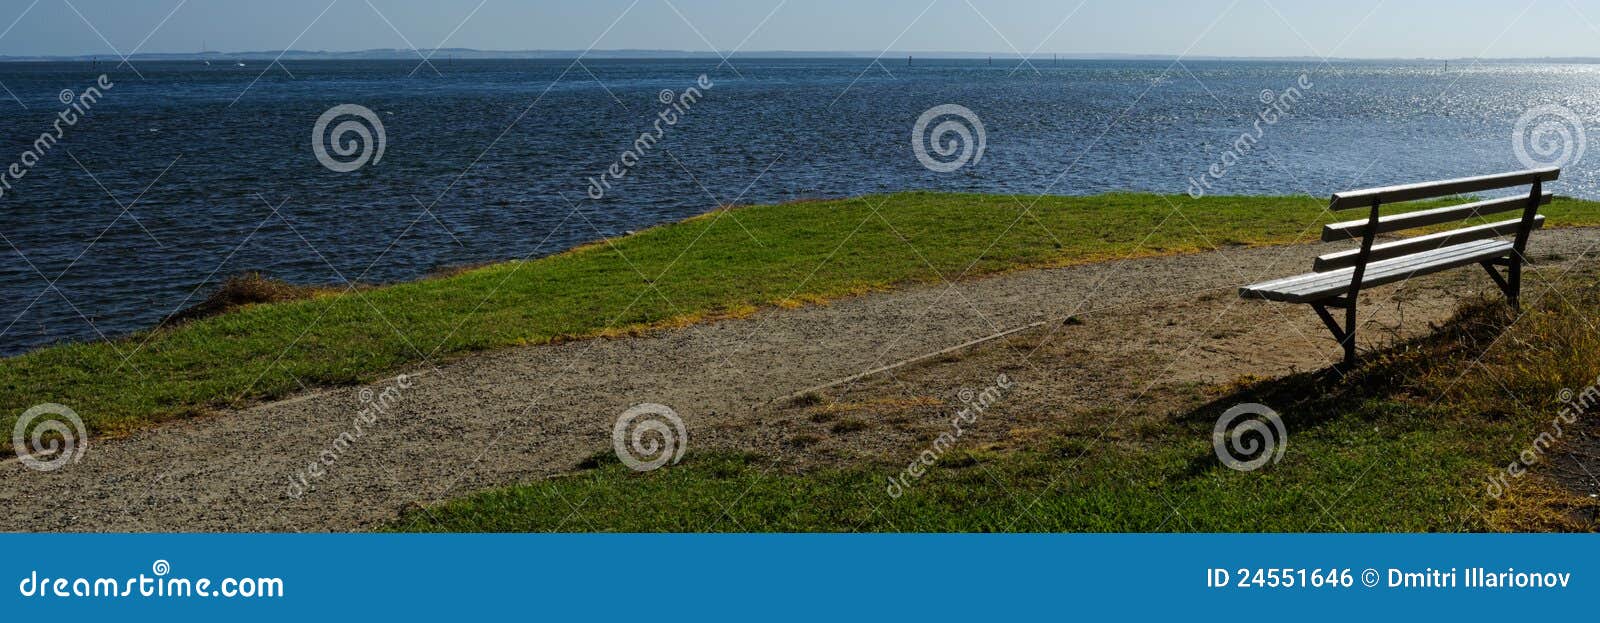 Bench at Western Port. Panorama of with wooden bench at calm blue seas of Western Port, bright sunlight, glare on water with light wind, on green grass in Victoria, Australia